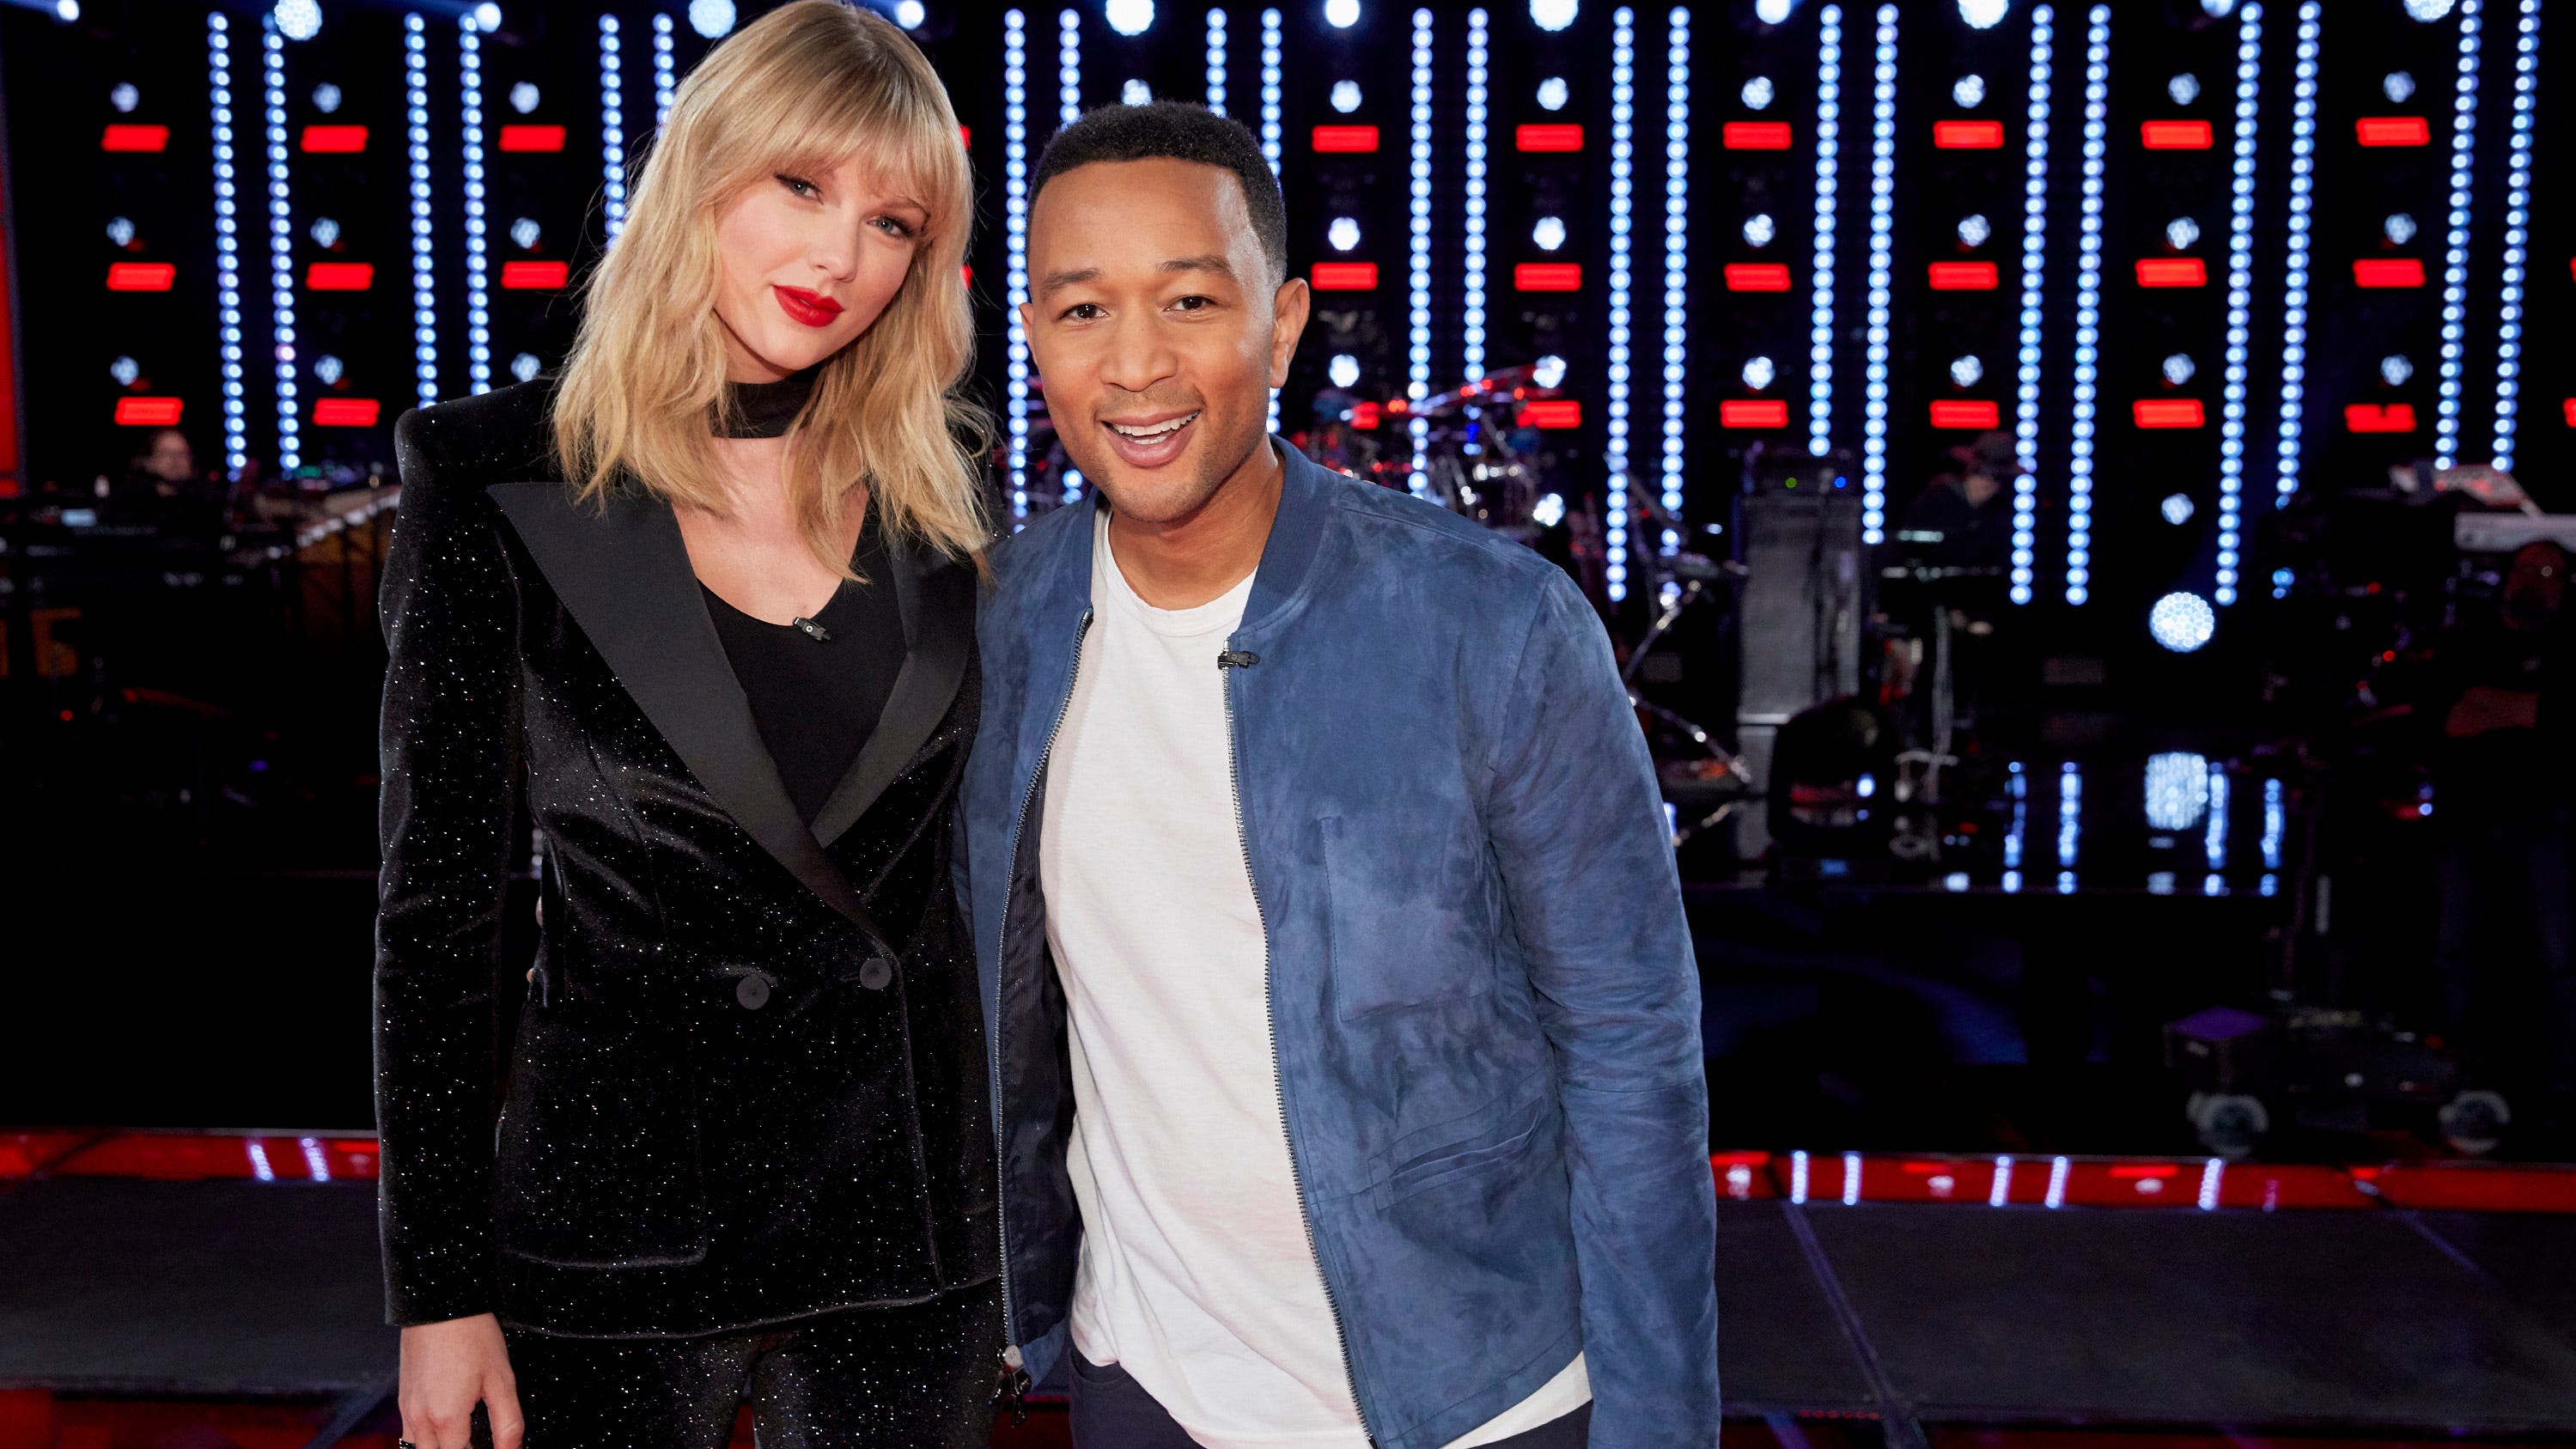 The Voice Taylor Swift As Mega Mentor Steals The Show